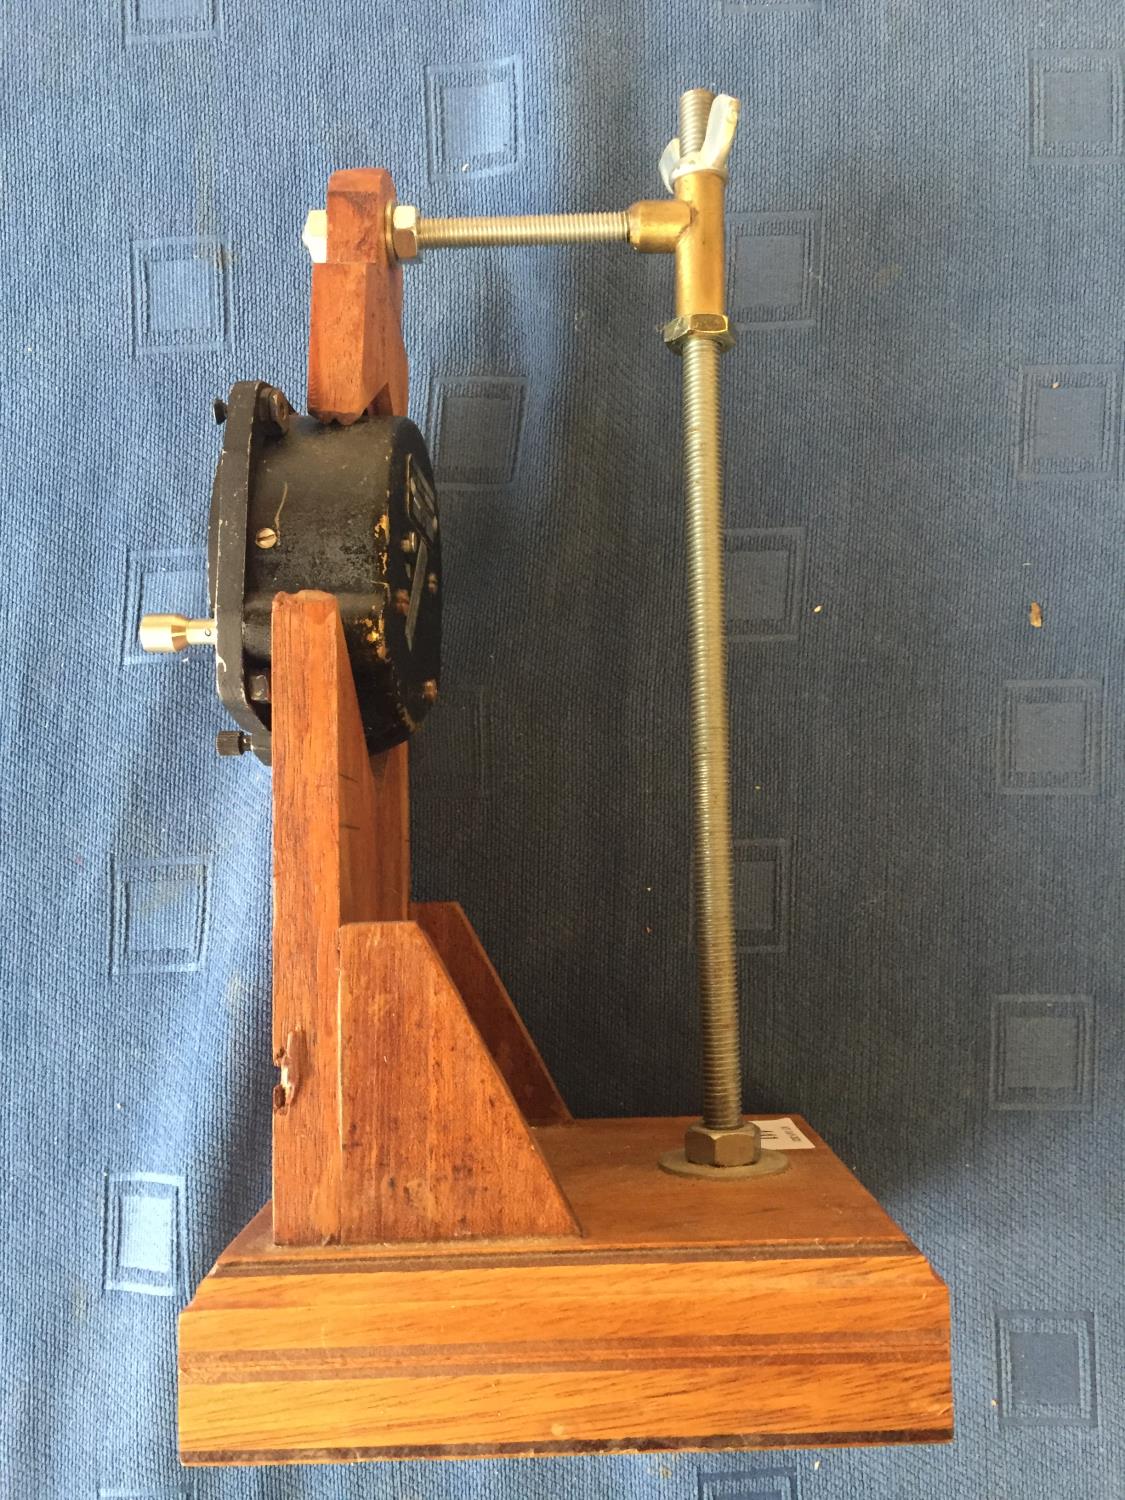 Pre-war Smiths 8 day aircraft clock with time/trip dial 8 cm d mounted on a wooden display stand, - Image 2 of 5